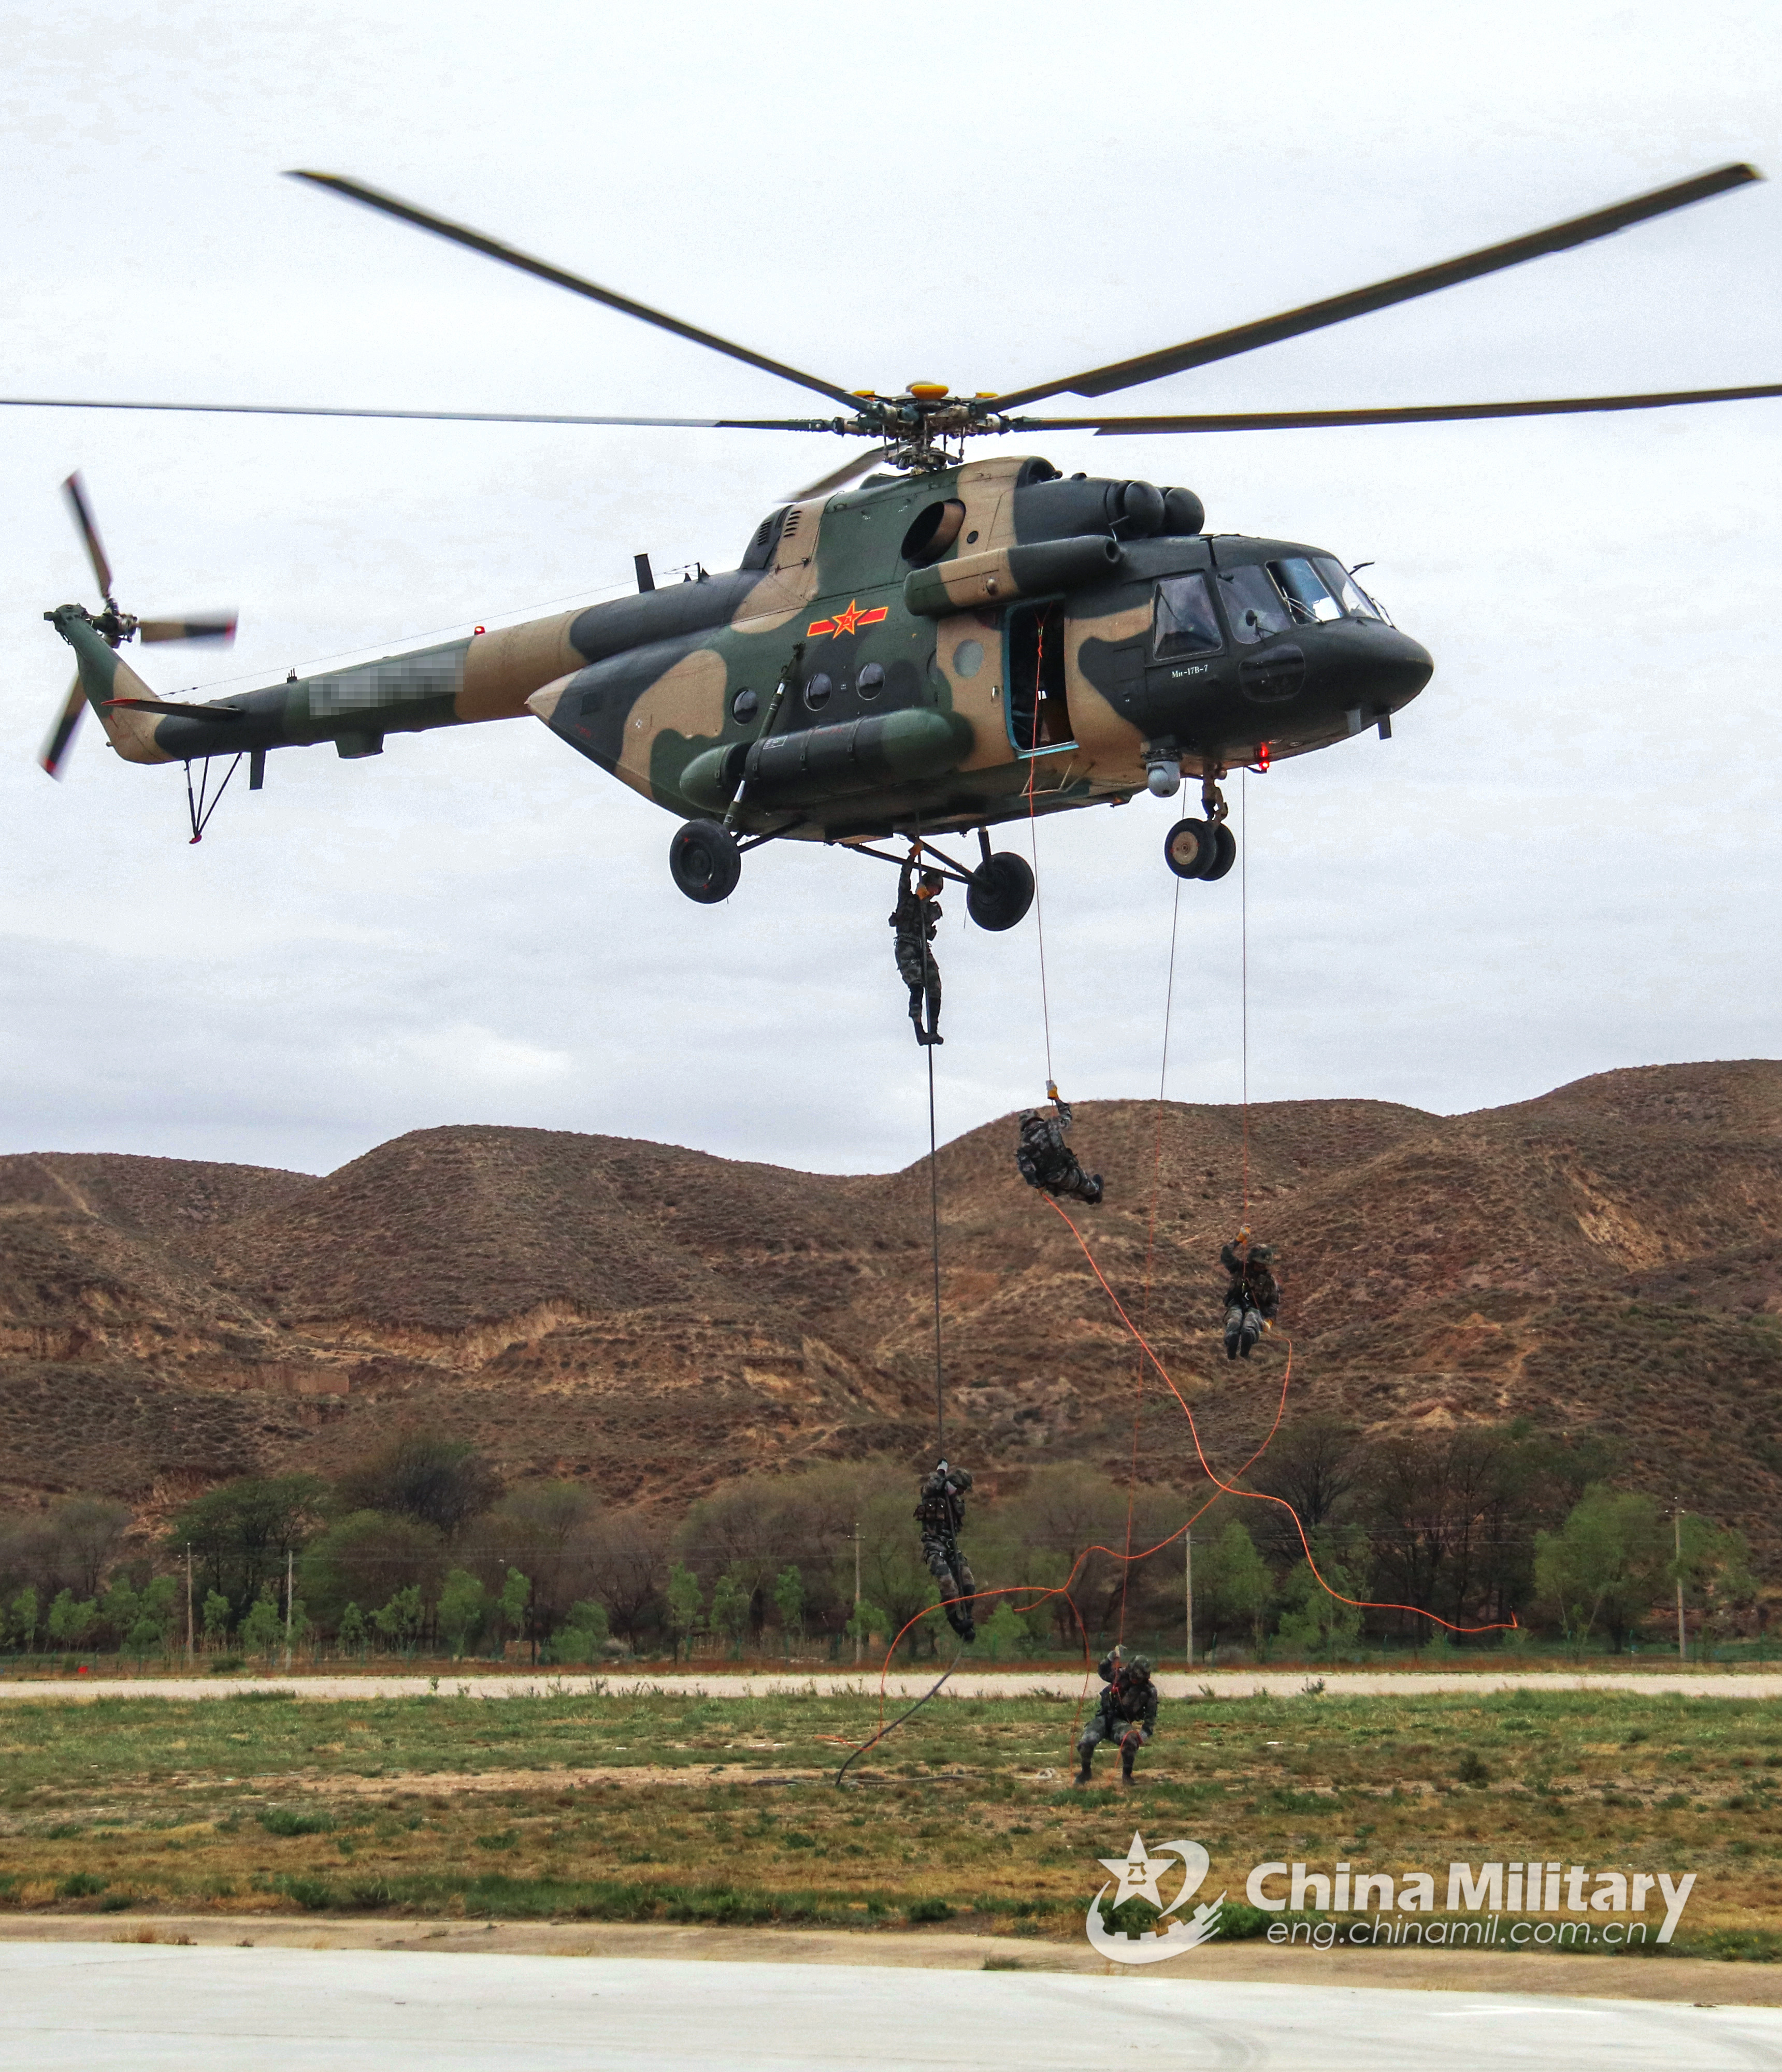 Soldiers fast-rope from hovering helicopters - Photos China - 中国